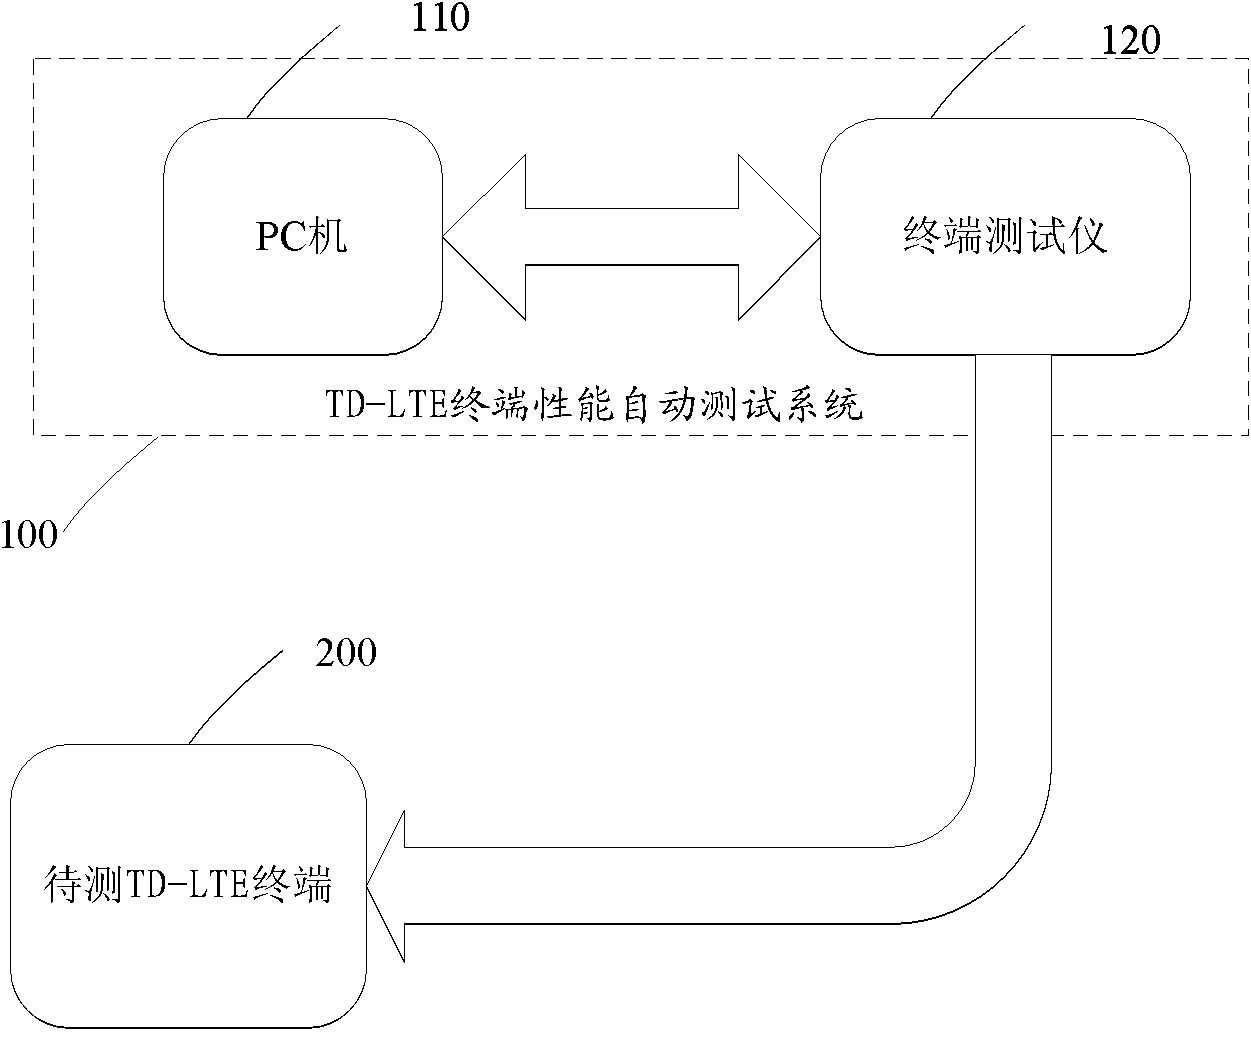 System and method for automatically testing performance of TD-LTE (Time Division-Long Term Evolution) terminal